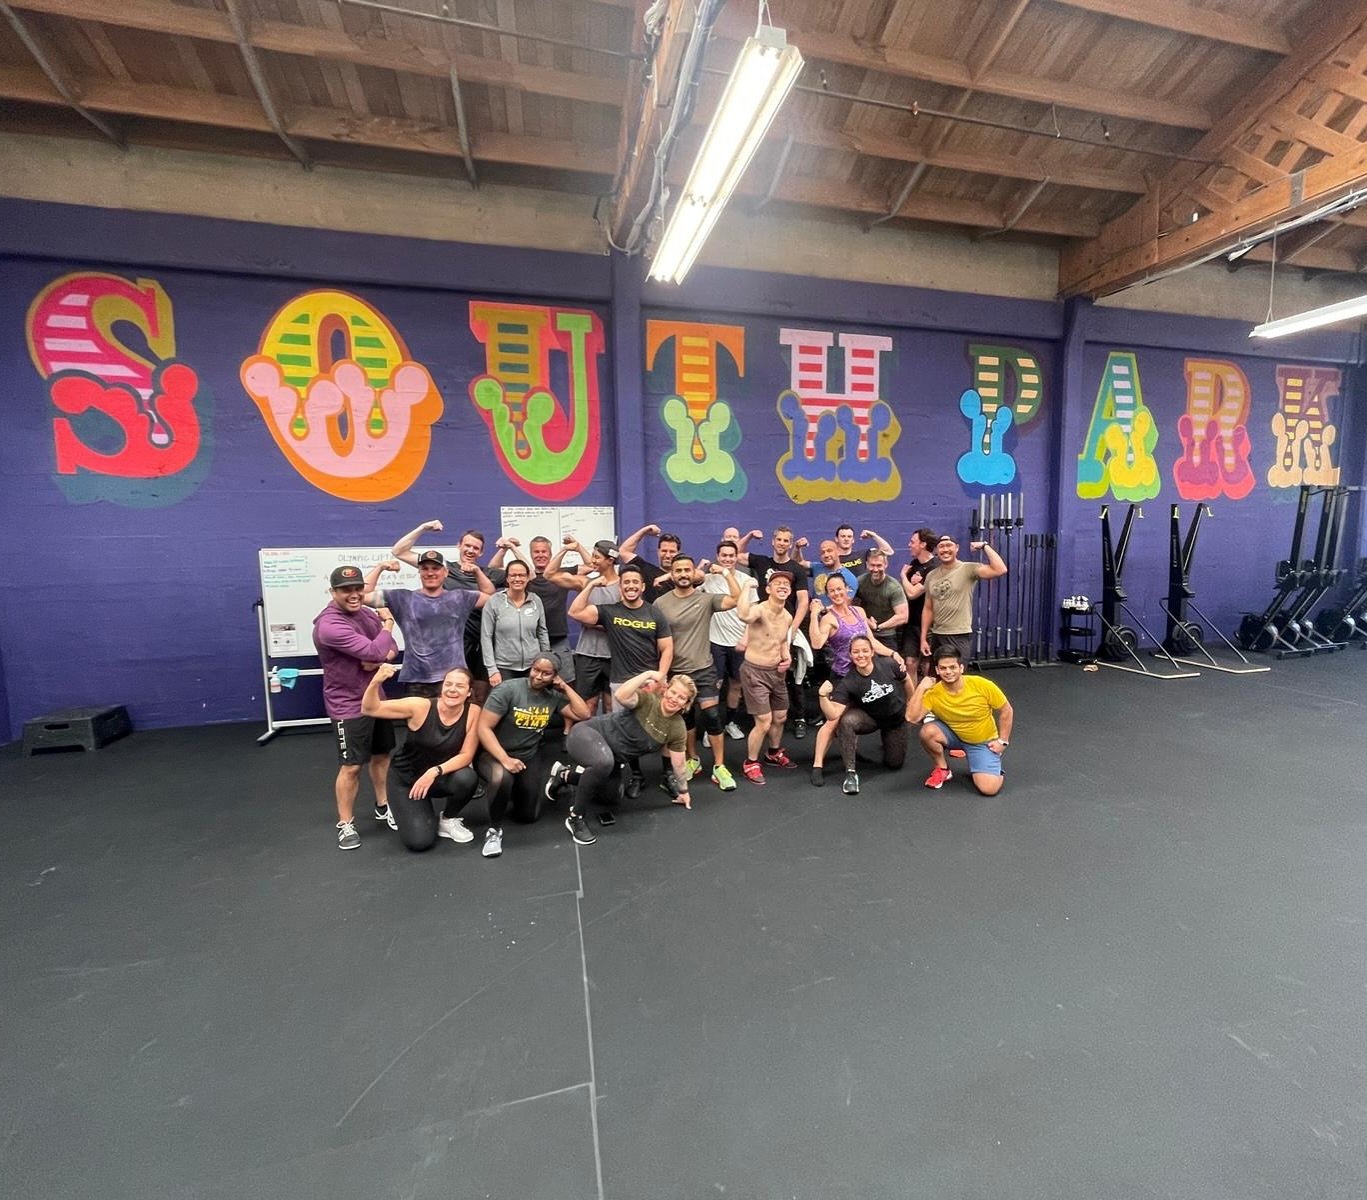 Incredible turnout for our inaugural weekly Sundays Olympic lifting 10:30AM class with Coach Nadia @nads_lifts71k and Coach Victor.
.
.
.
#olympiclifting #oly #olysundays #barbellclub #olympicliftingcoach #olympicweightlifting #crossfitsouthpark #cro